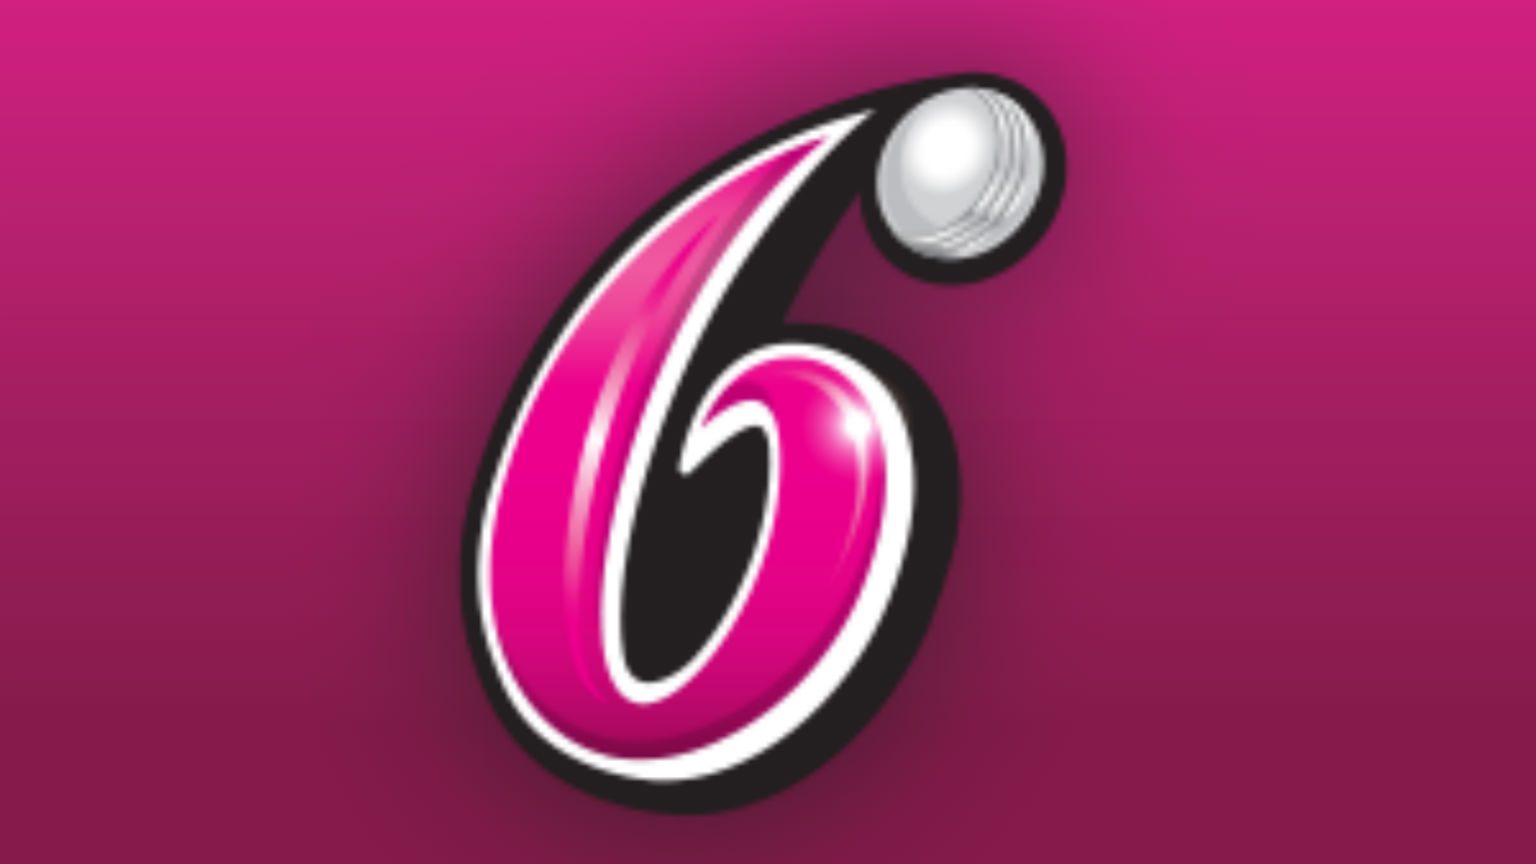 Sydney sixers climb at that top spot with that thrilling win